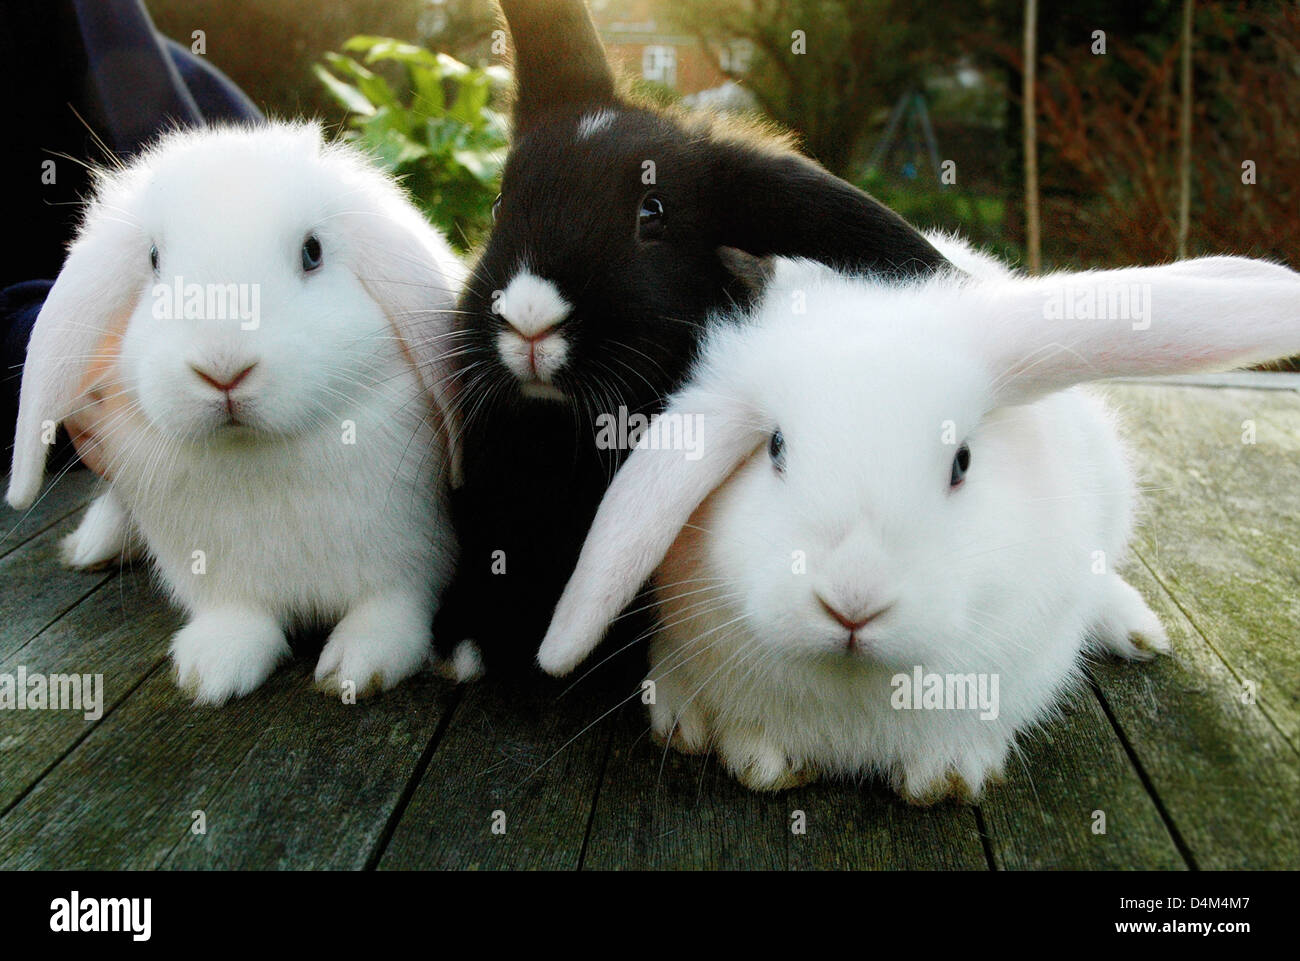 Rabbits sitting on wooden deck Stock Photo